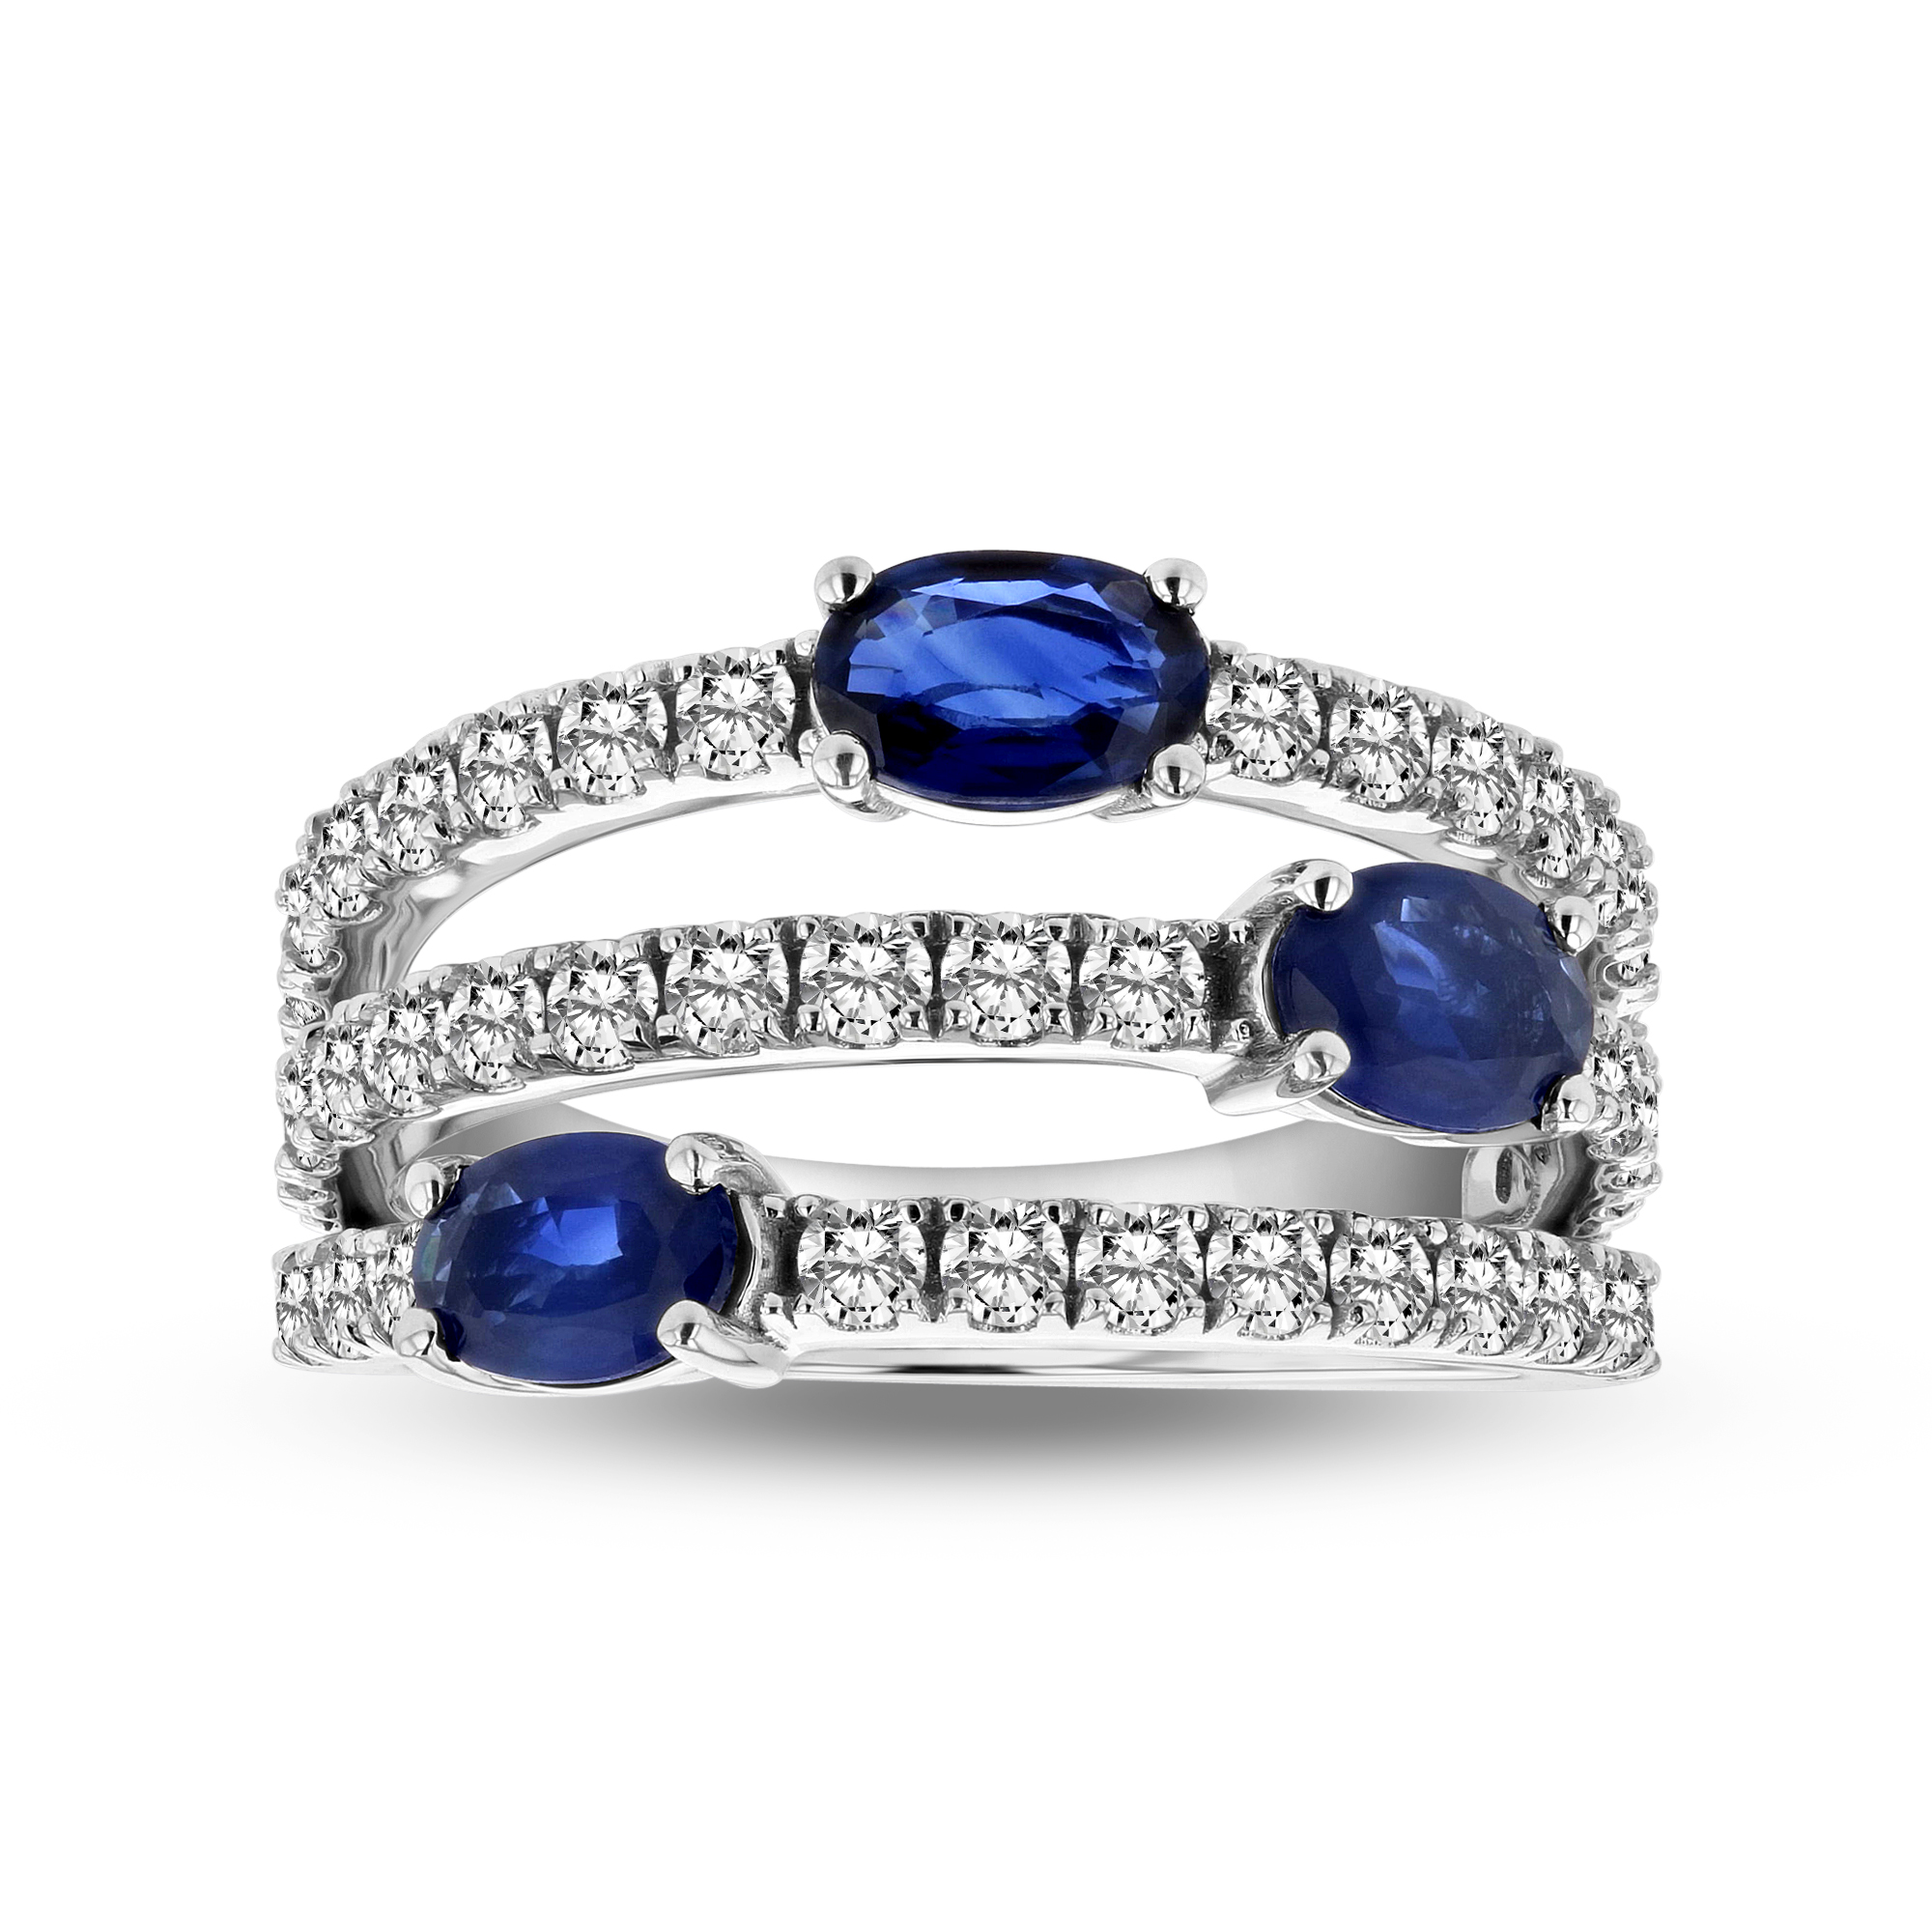 View 3ctw Diamond and Sapphire Ring in 14k